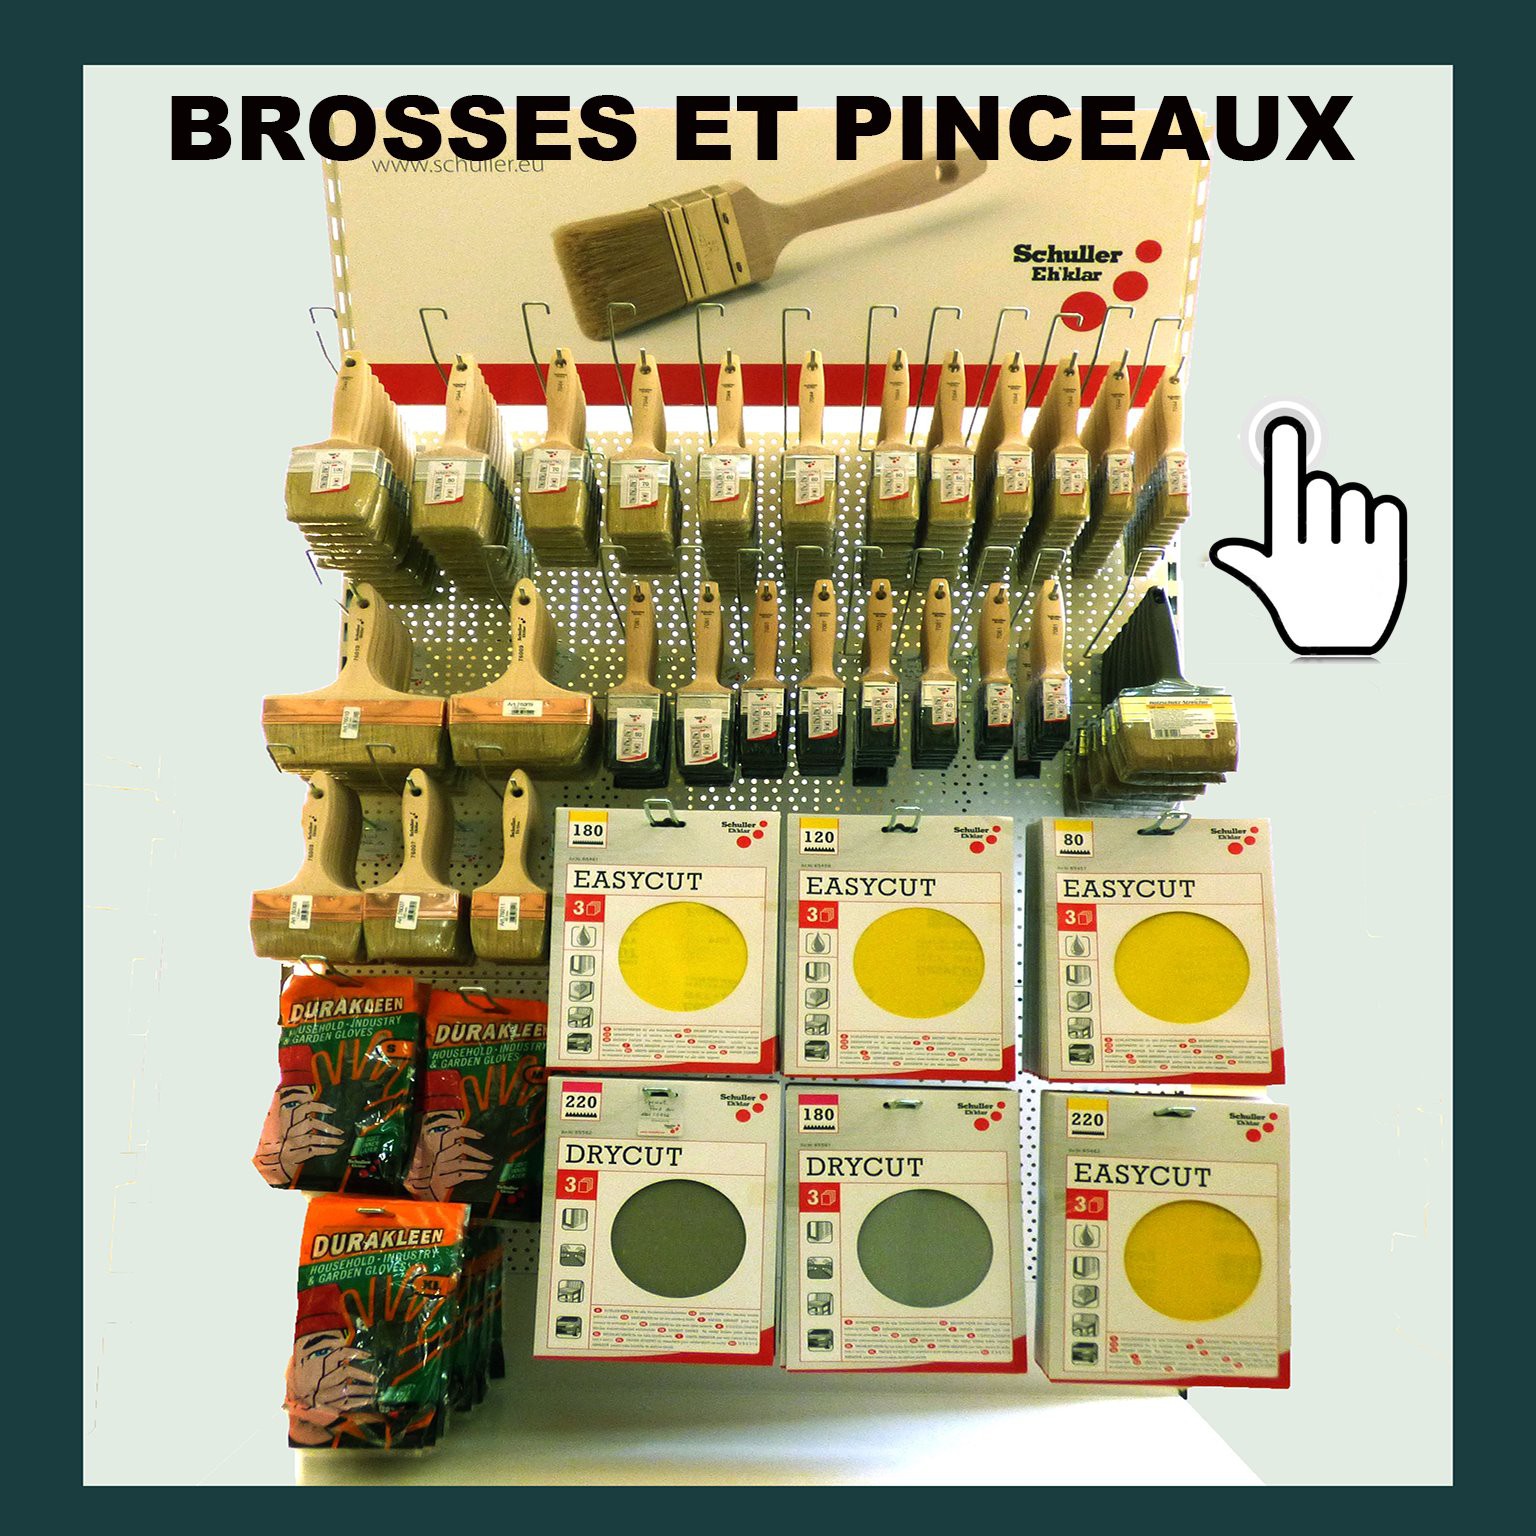 Pinceau/Spalter/Brosse 100mm / Made in France/pour Murs, Meubles à